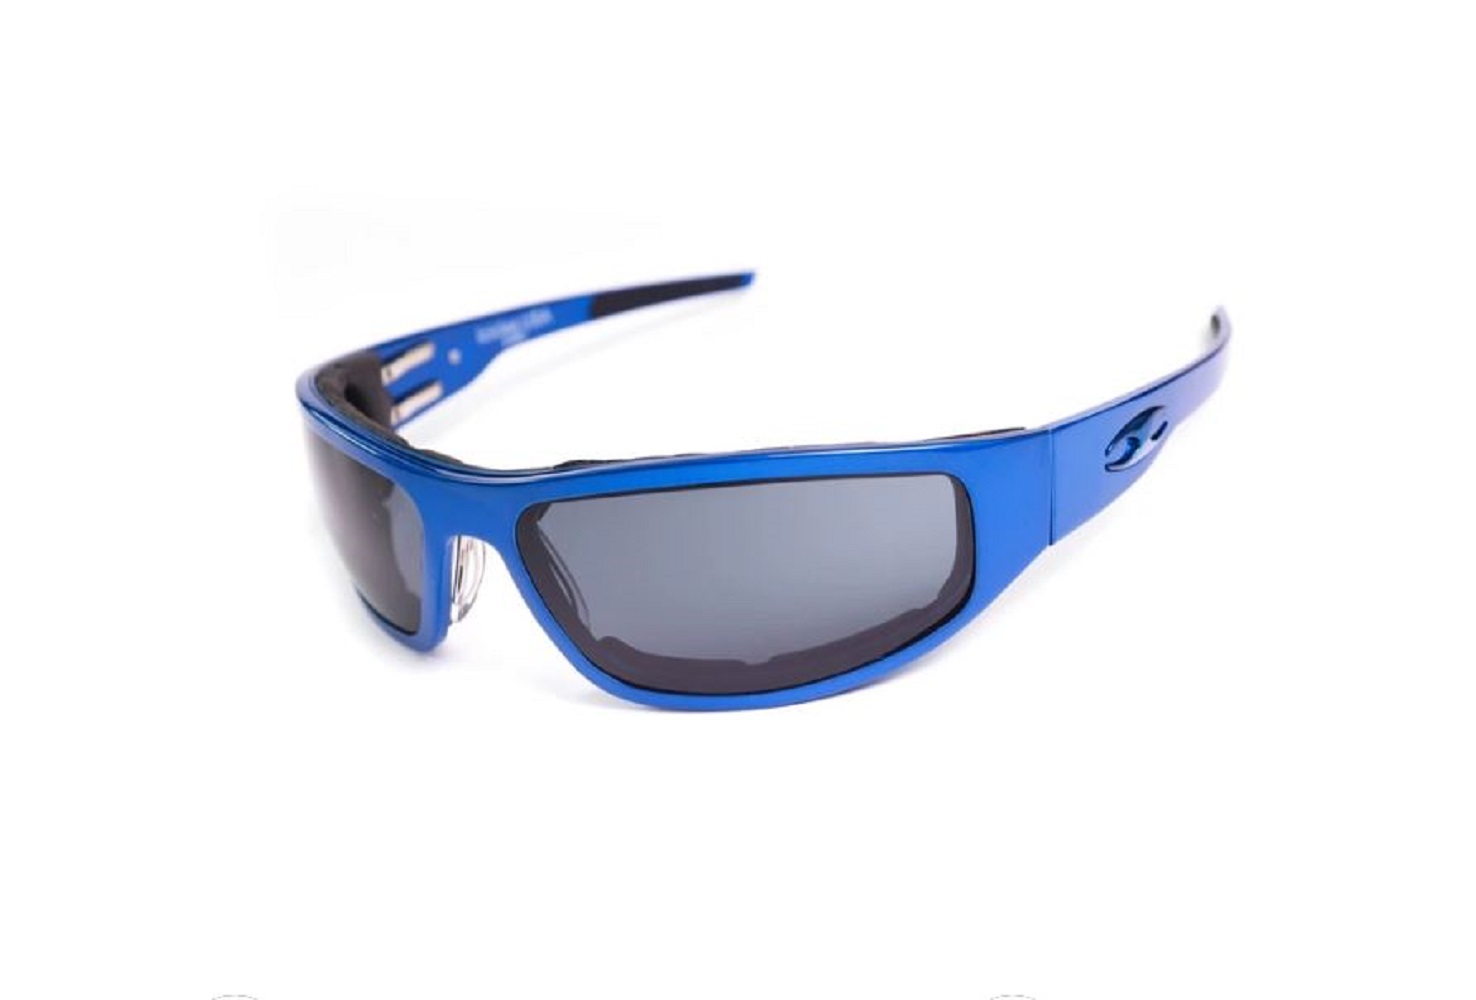 New Icicles Bagger Standard Grey Lens Sunglasses With Flat Blue Frame